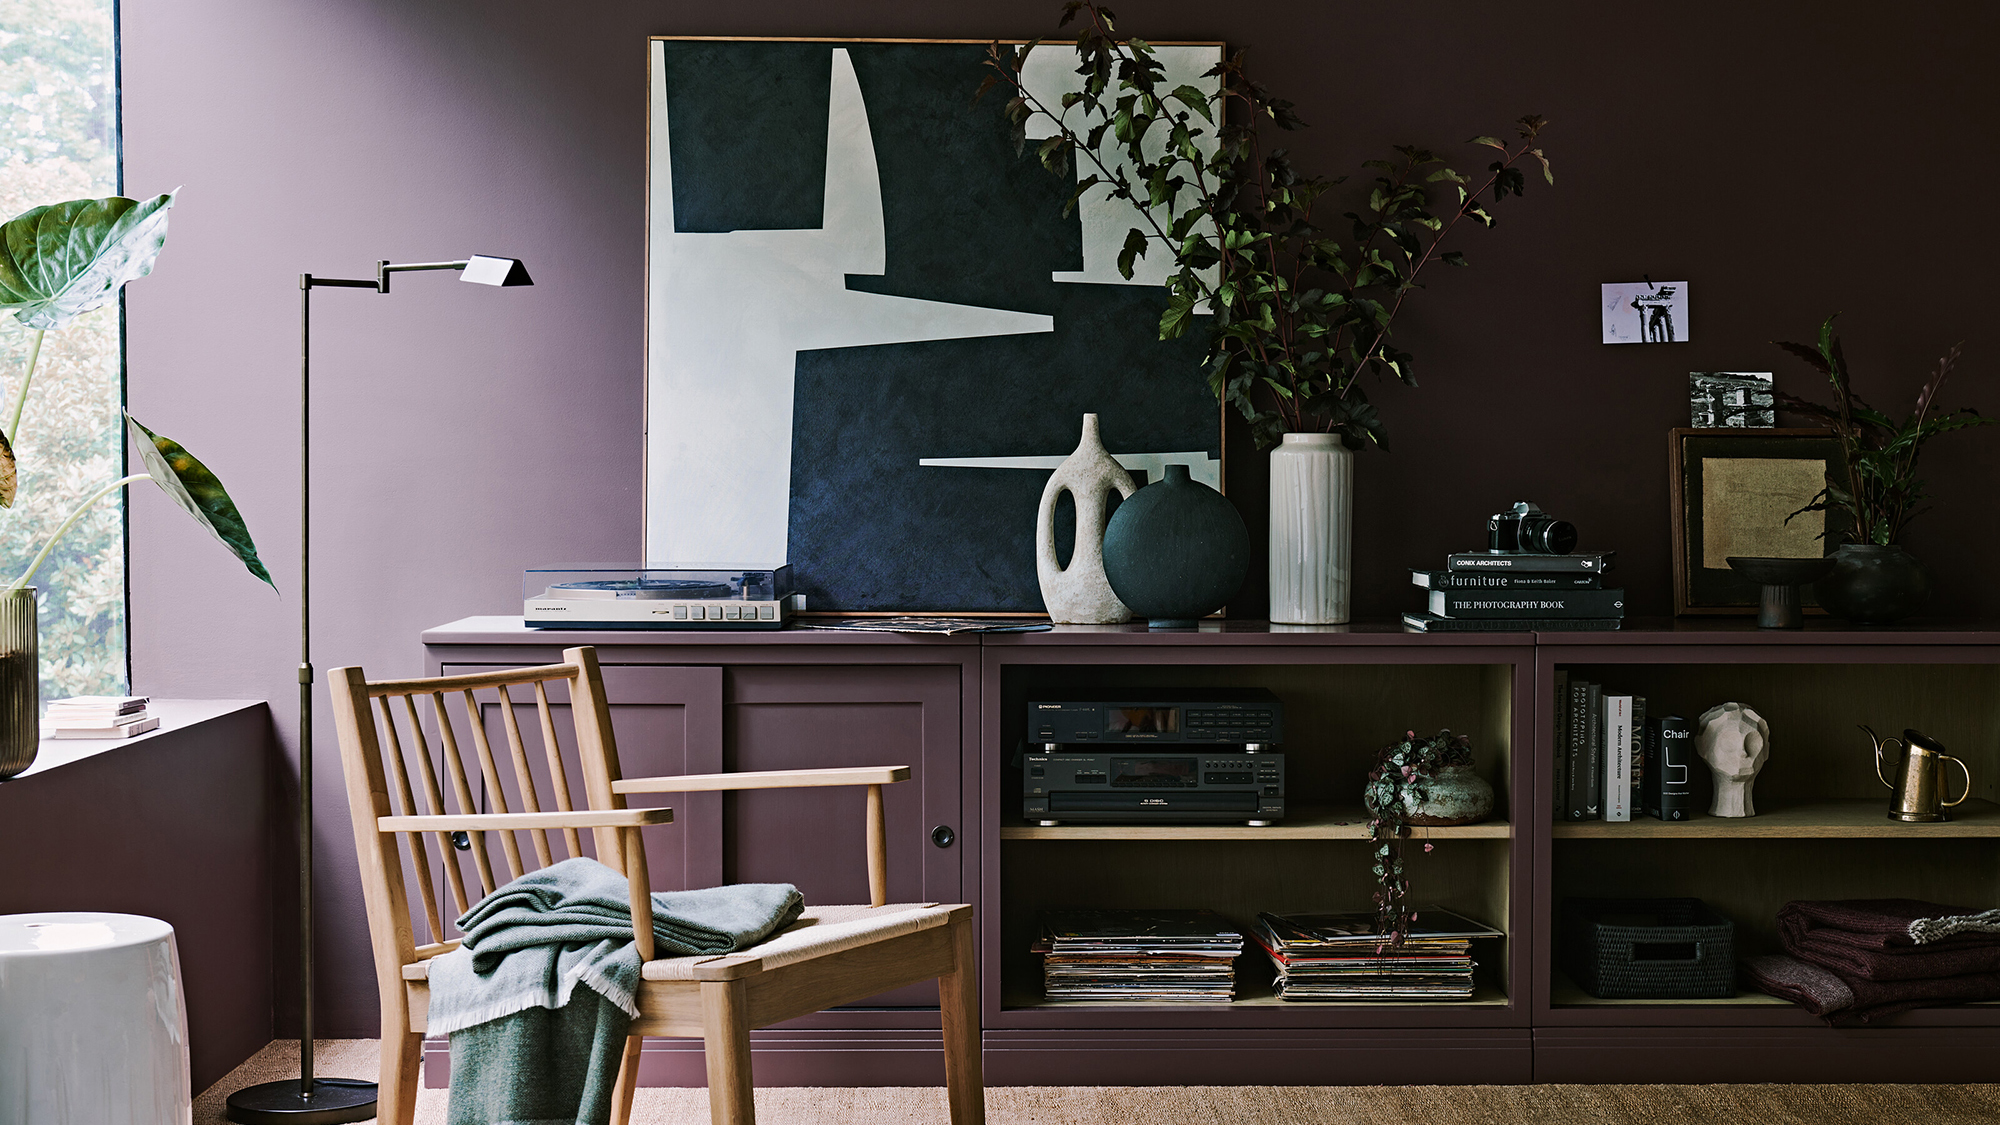 1 Opt for a gentle purple on kitchen cabinets